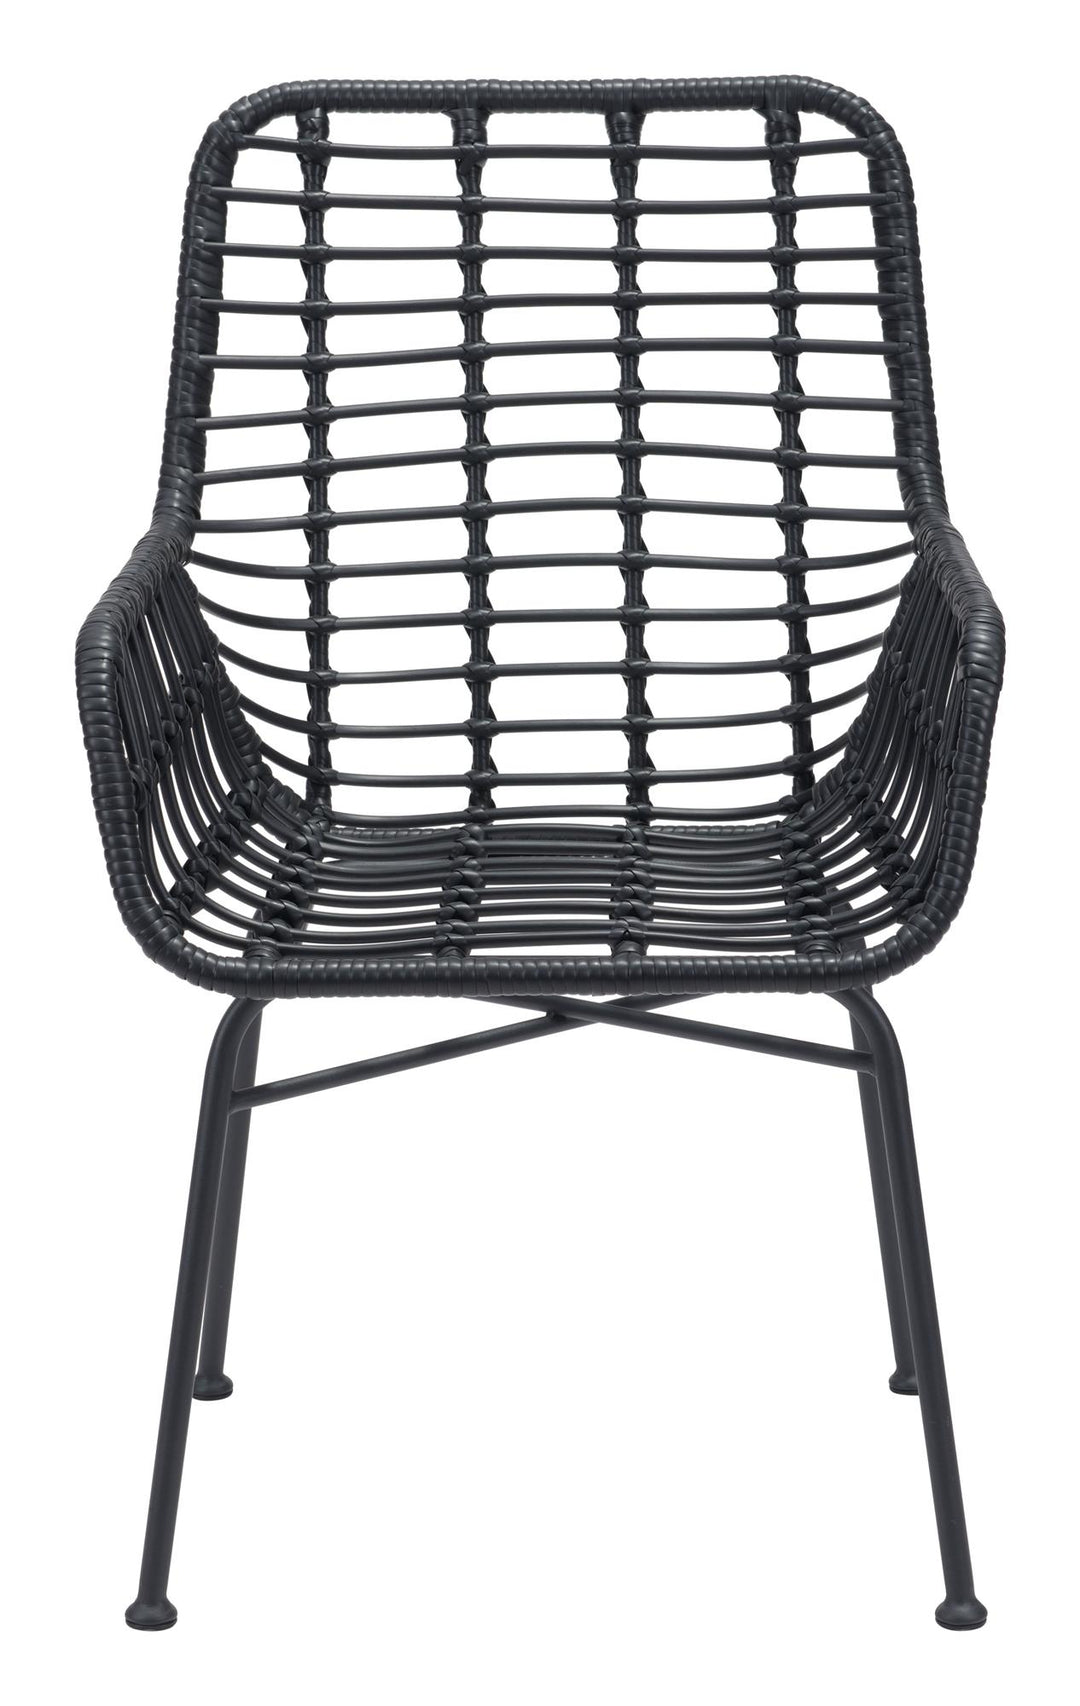 Madeline Outdoor Dining Chair, Set of 2 - Black